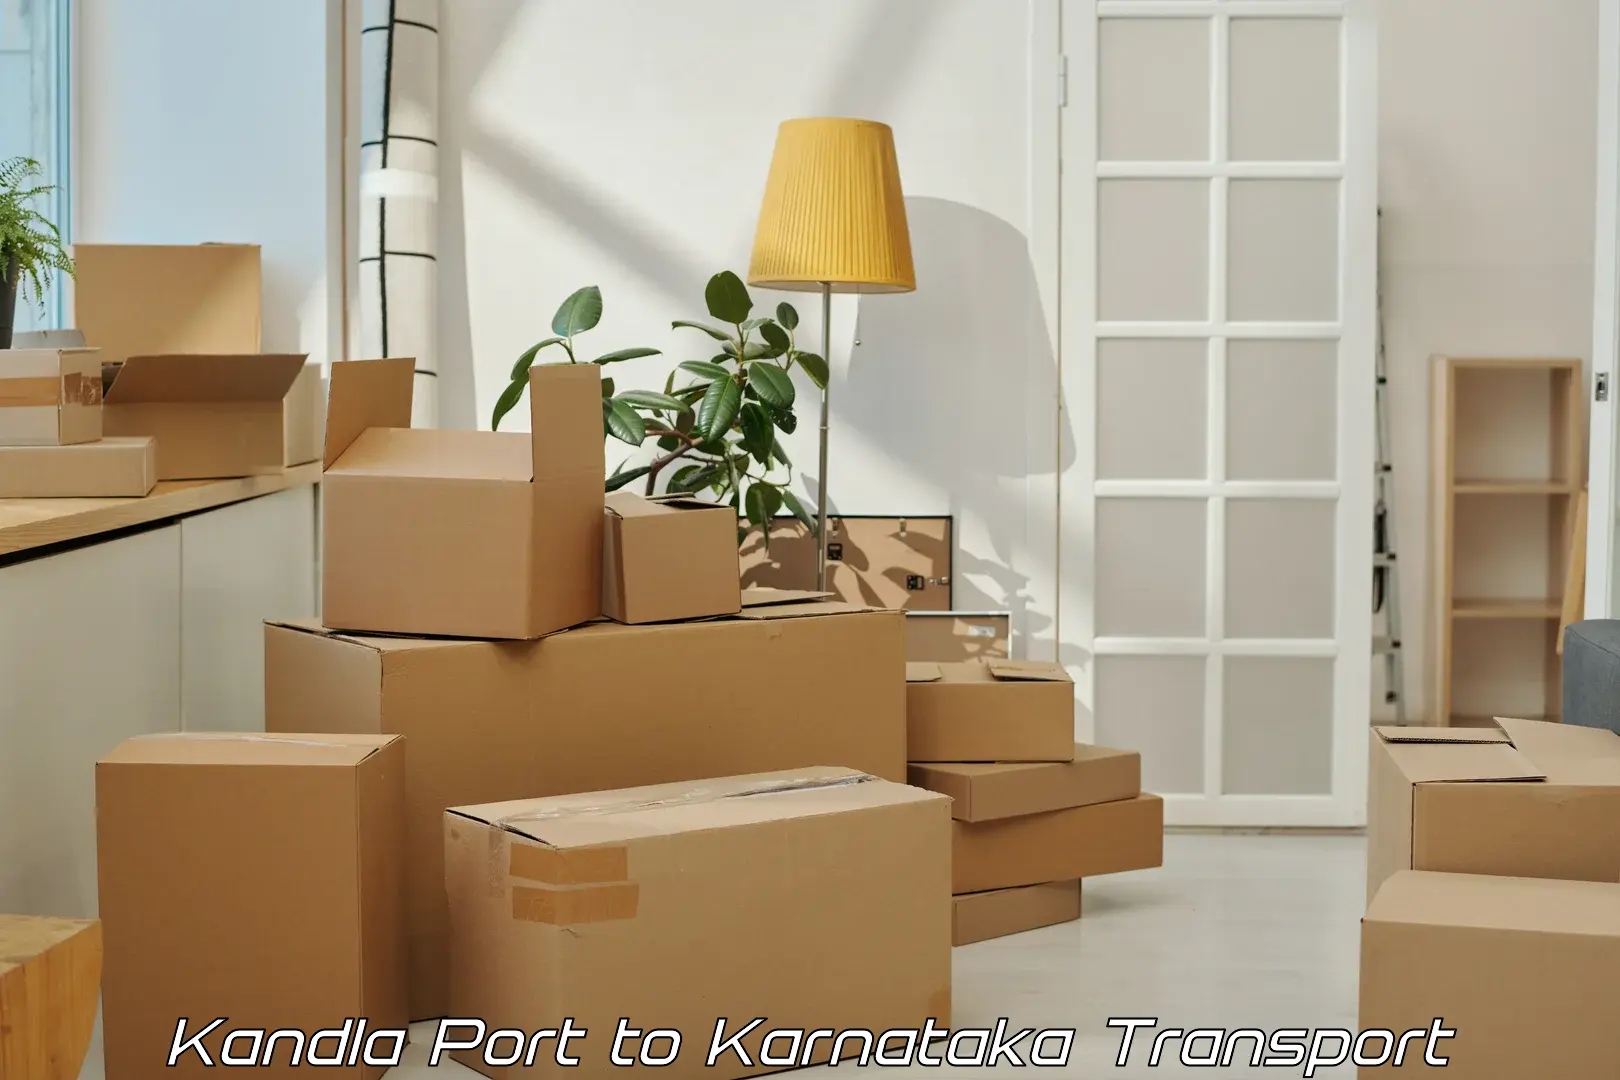 Two wheeler parcel service in Kandla Port to Mangalore